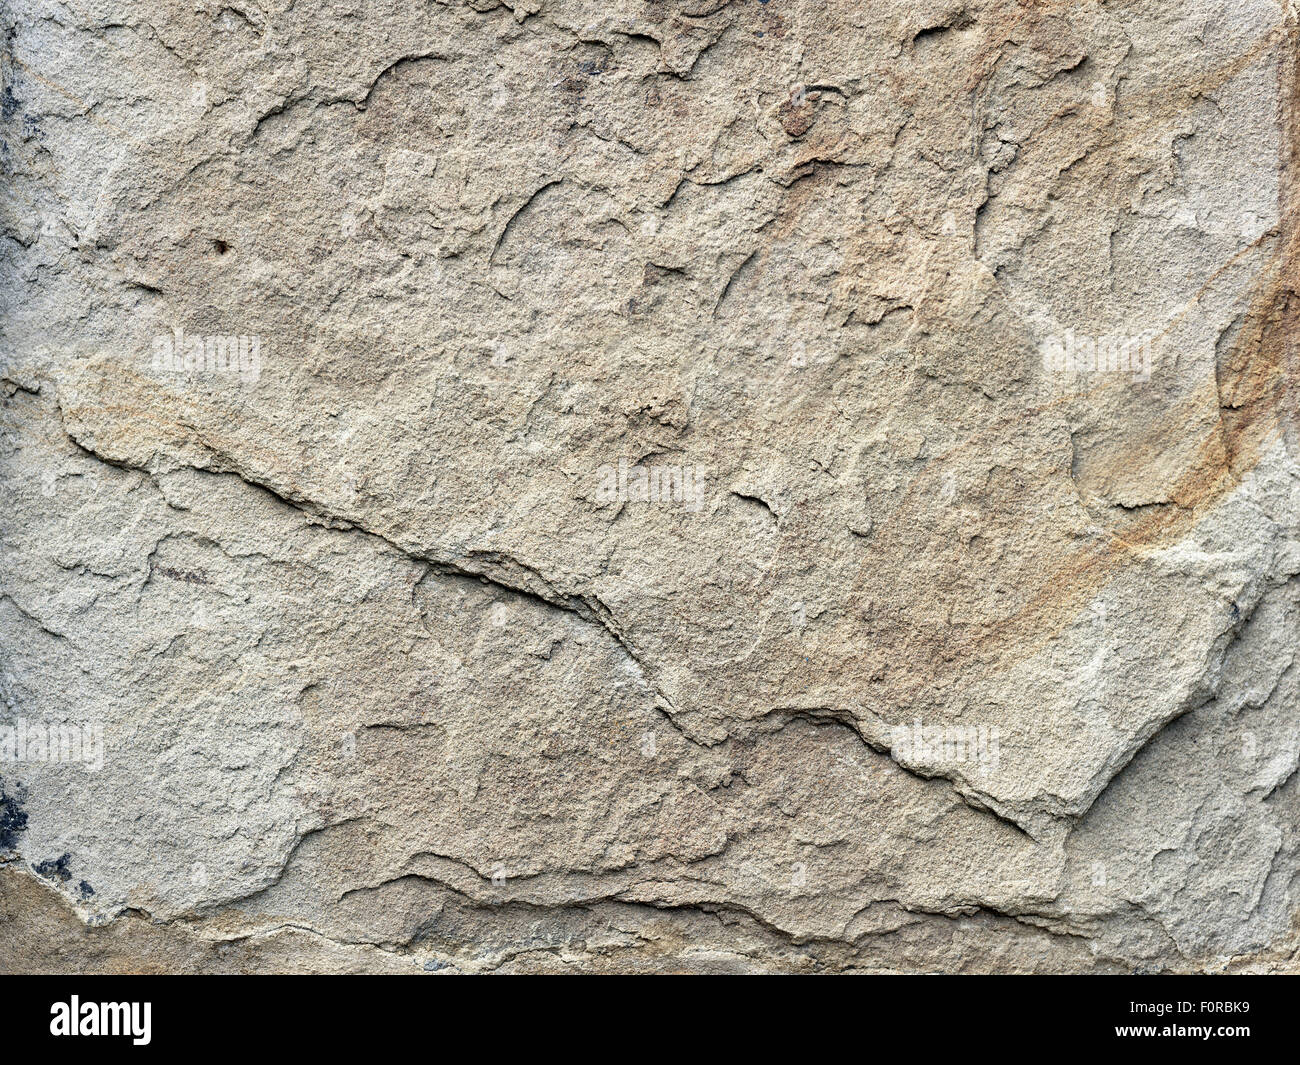 close up shot of old sand stone texture ideal for use as a background image Stock Photo